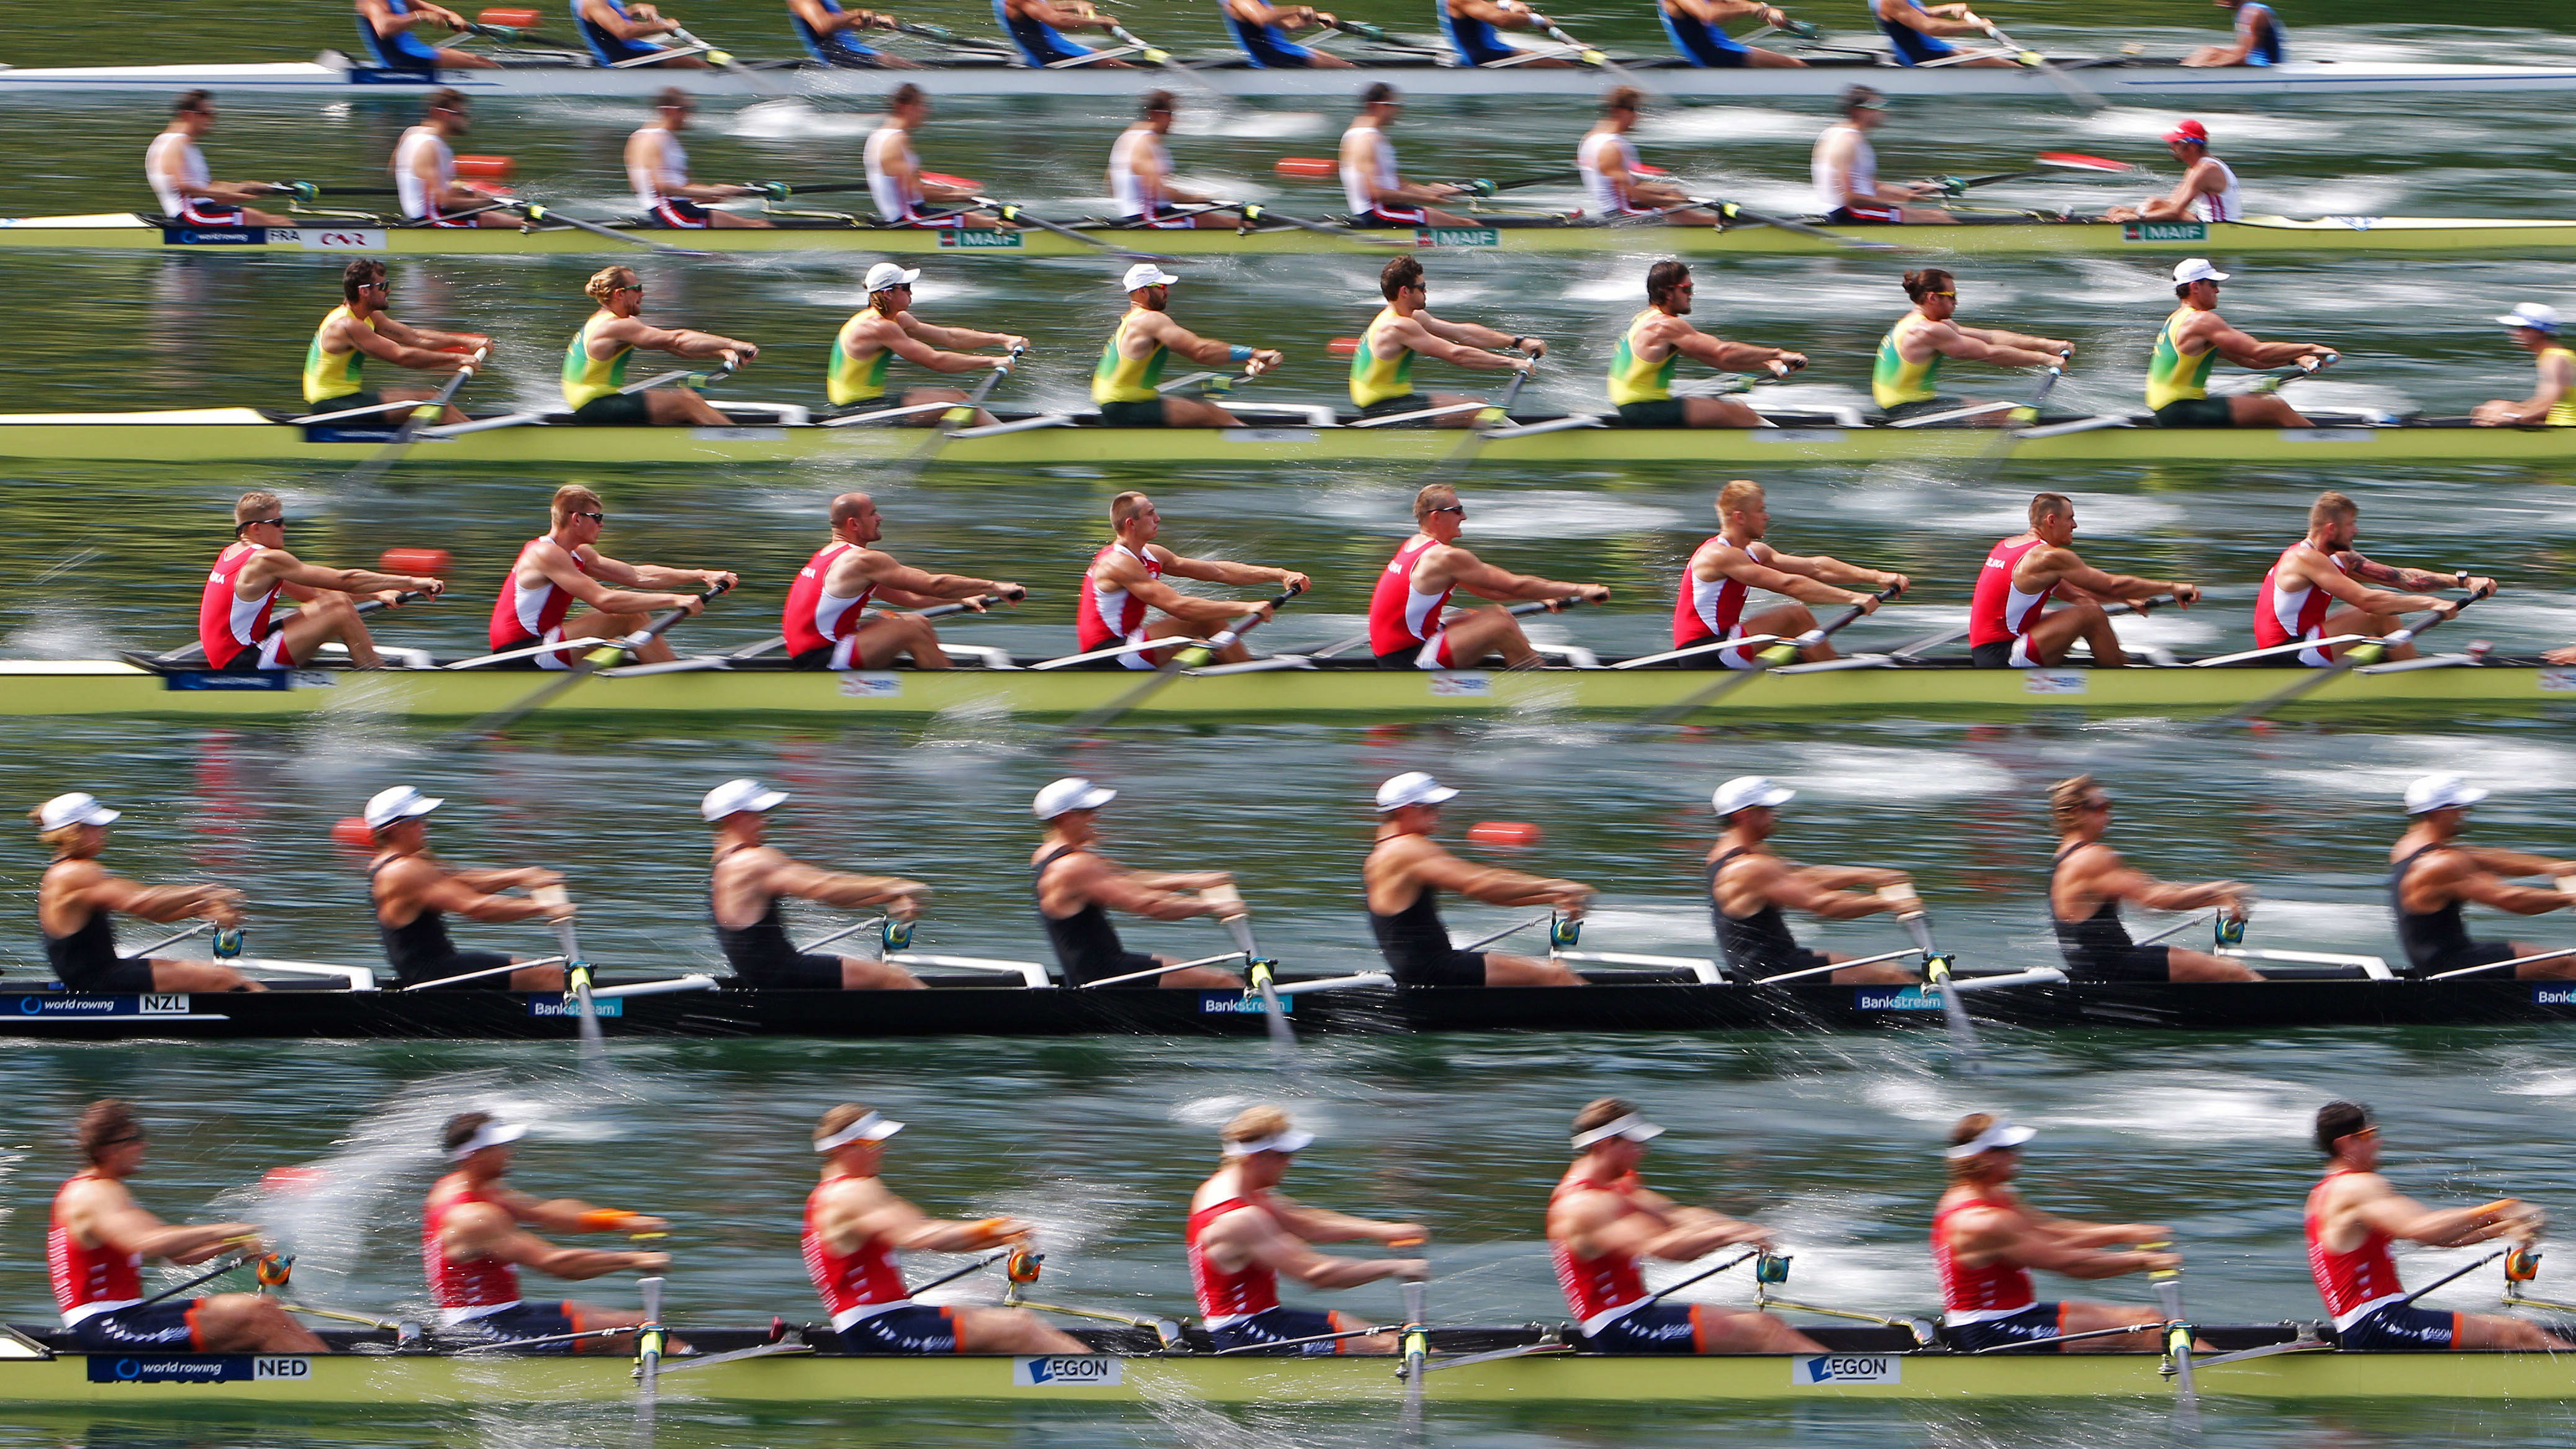 All you need to know about the 2019 World Rowing Championships